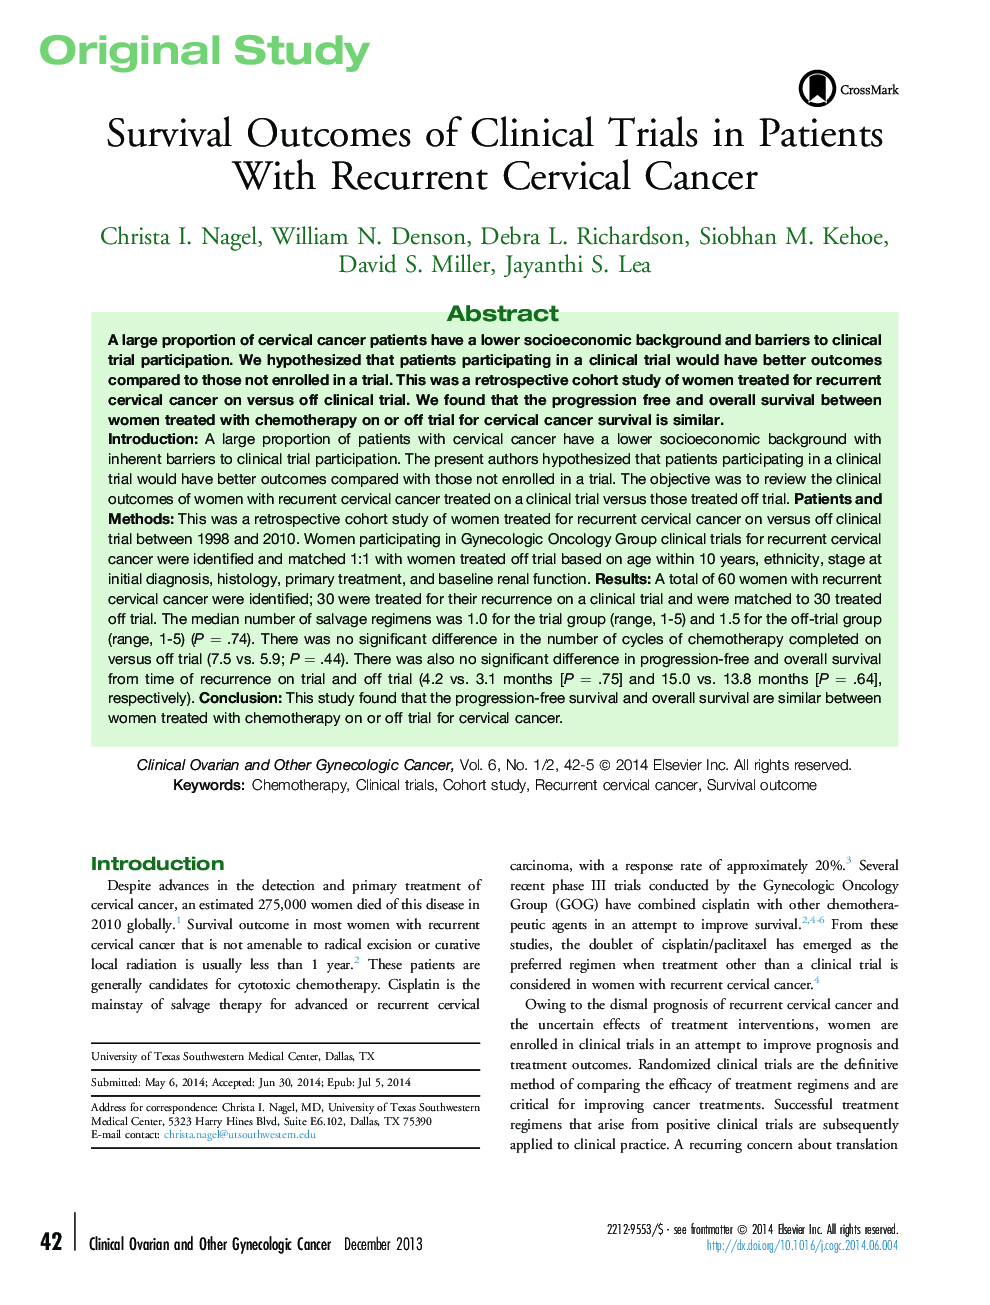 Survival Outcomes of Clinical Trials in Patients With Recurrent Cervical Cancer